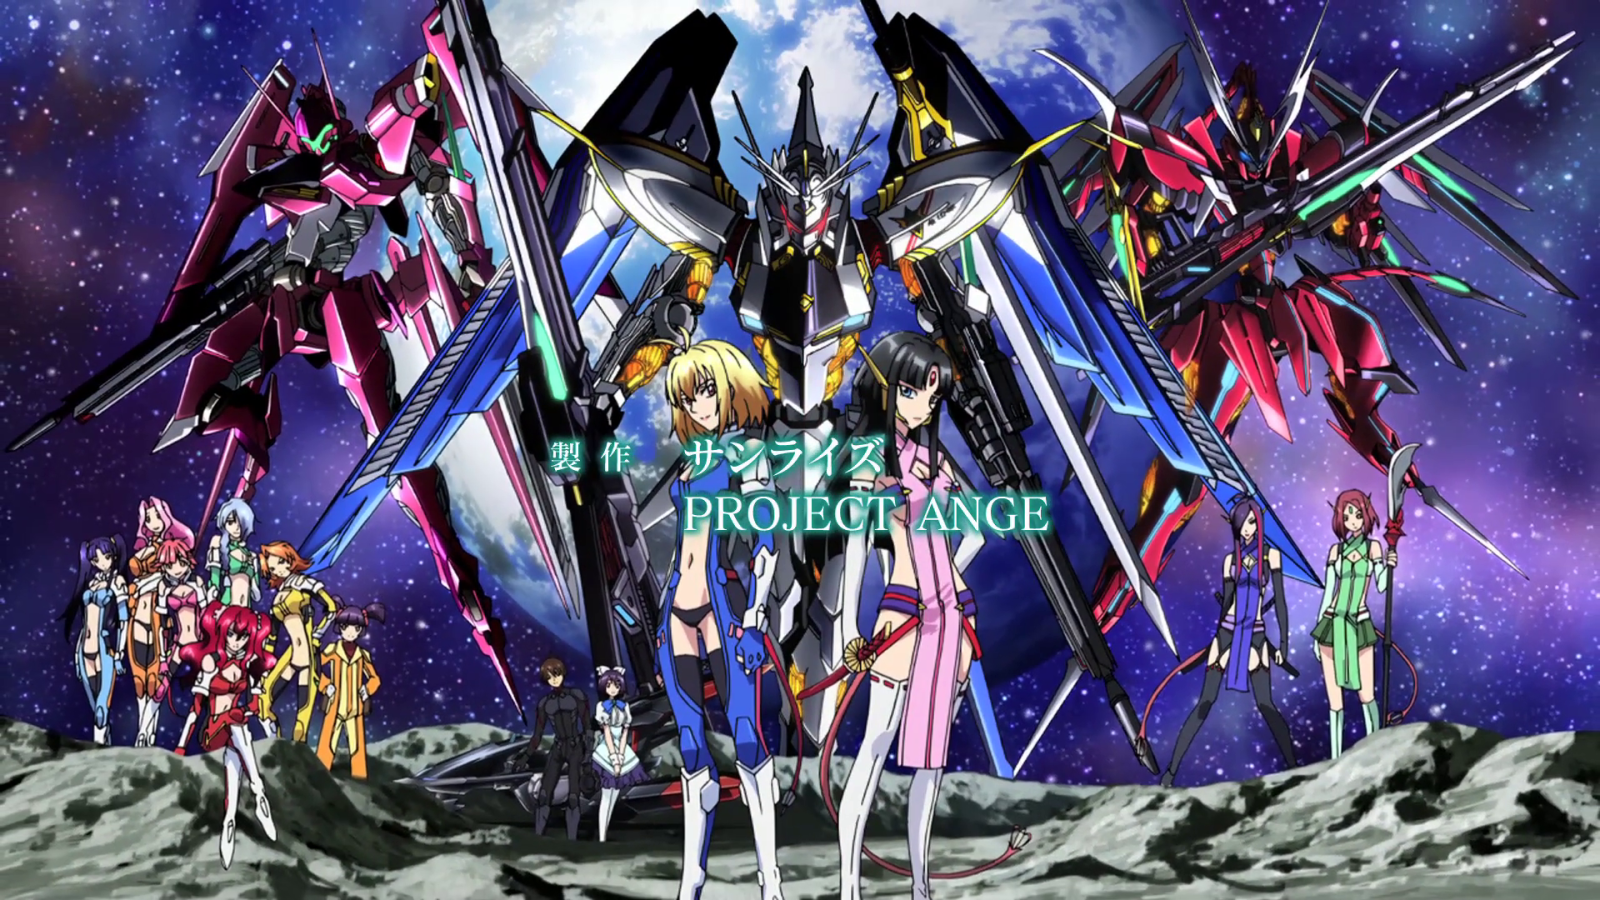 Cross Ange Rondo Of Angels And Dragons Villkiss , HD Wallpaper & Backgrounds